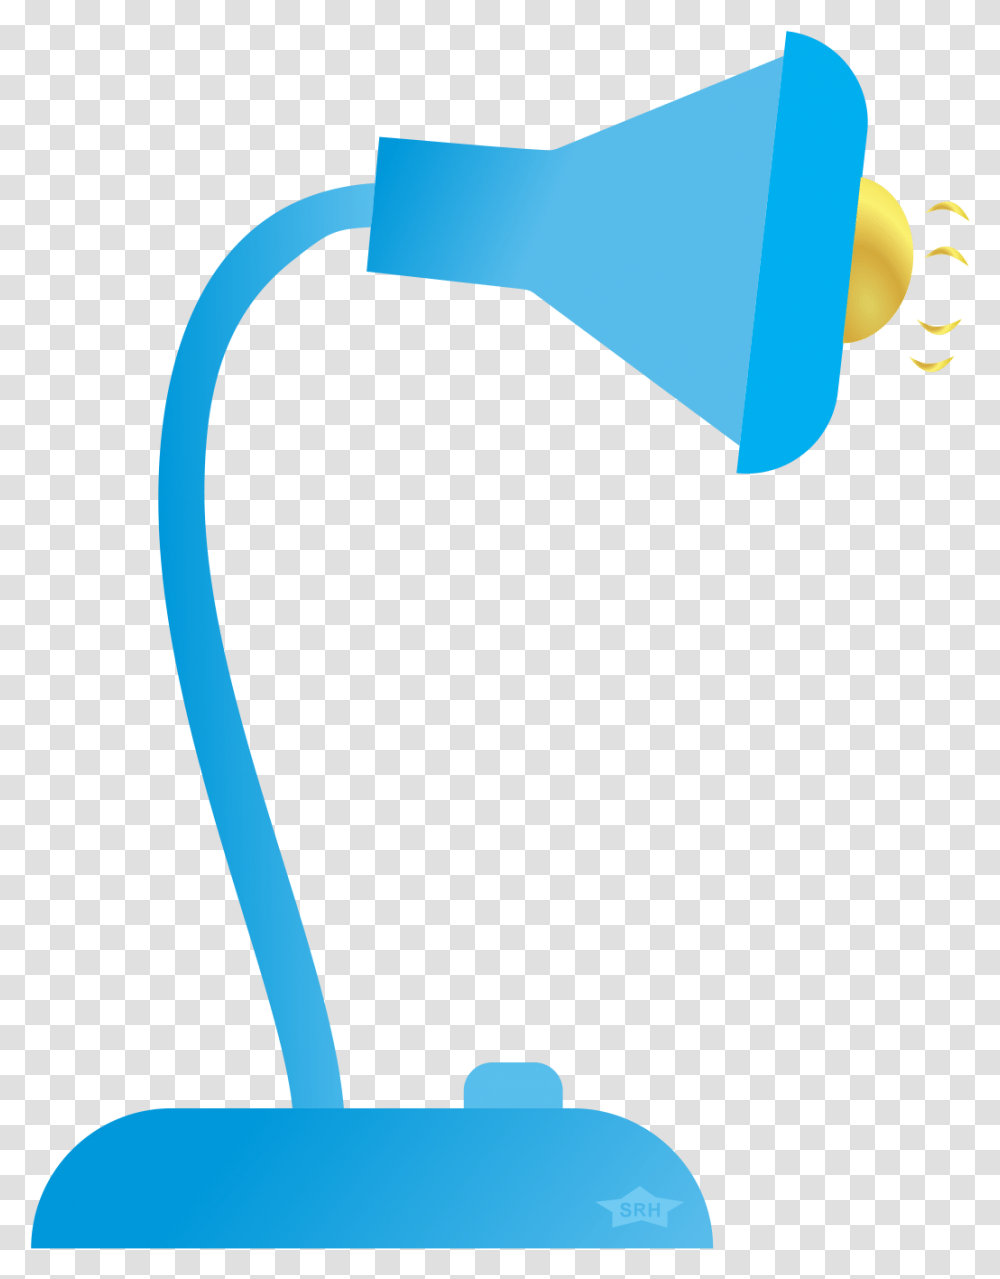 Object & Household Items Light Table Lamp Night Bulb Household Supply, Adapter Transparent Png